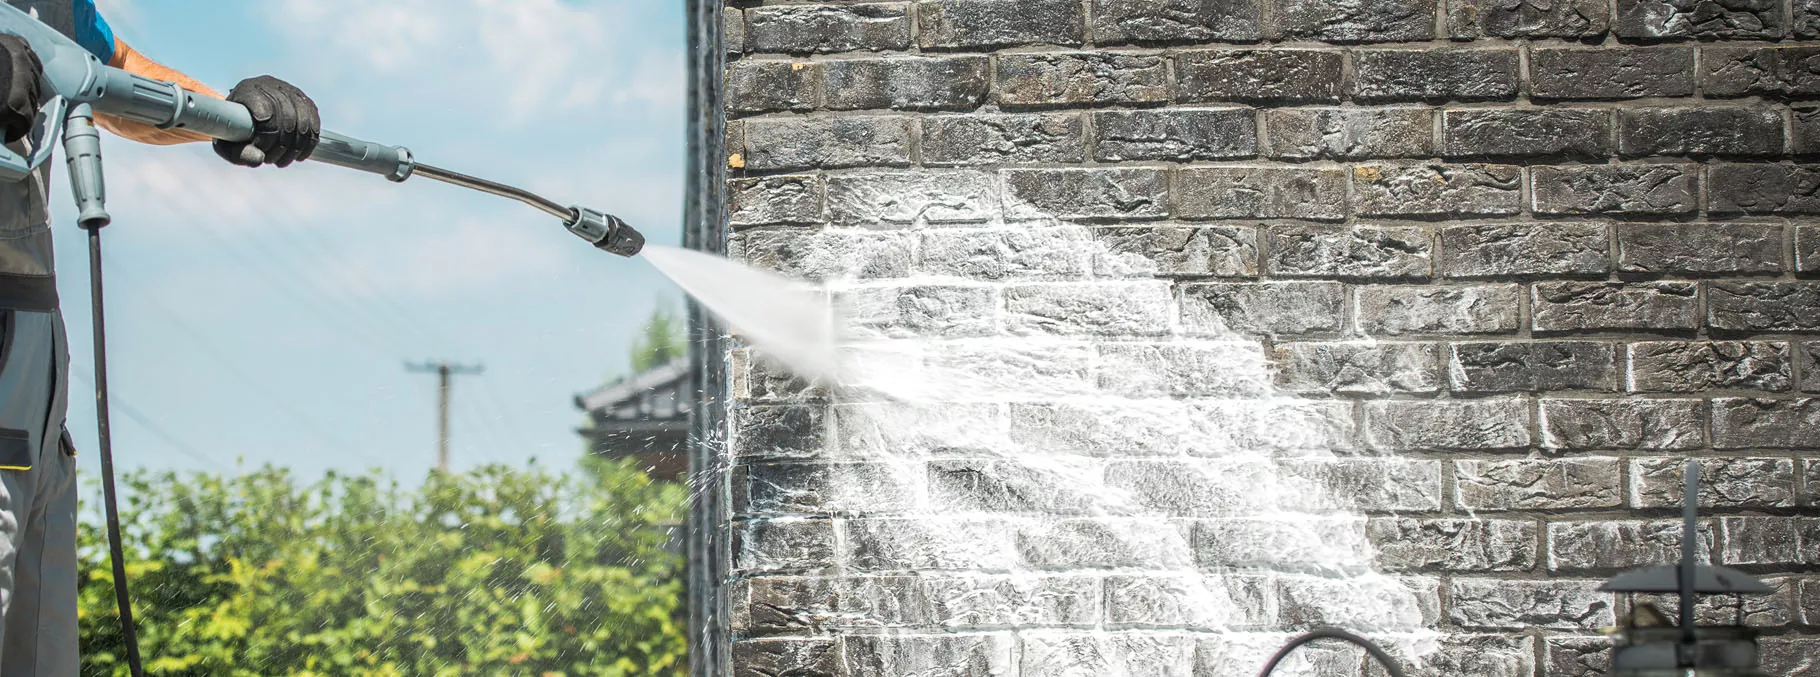 Pressure Washing Services title